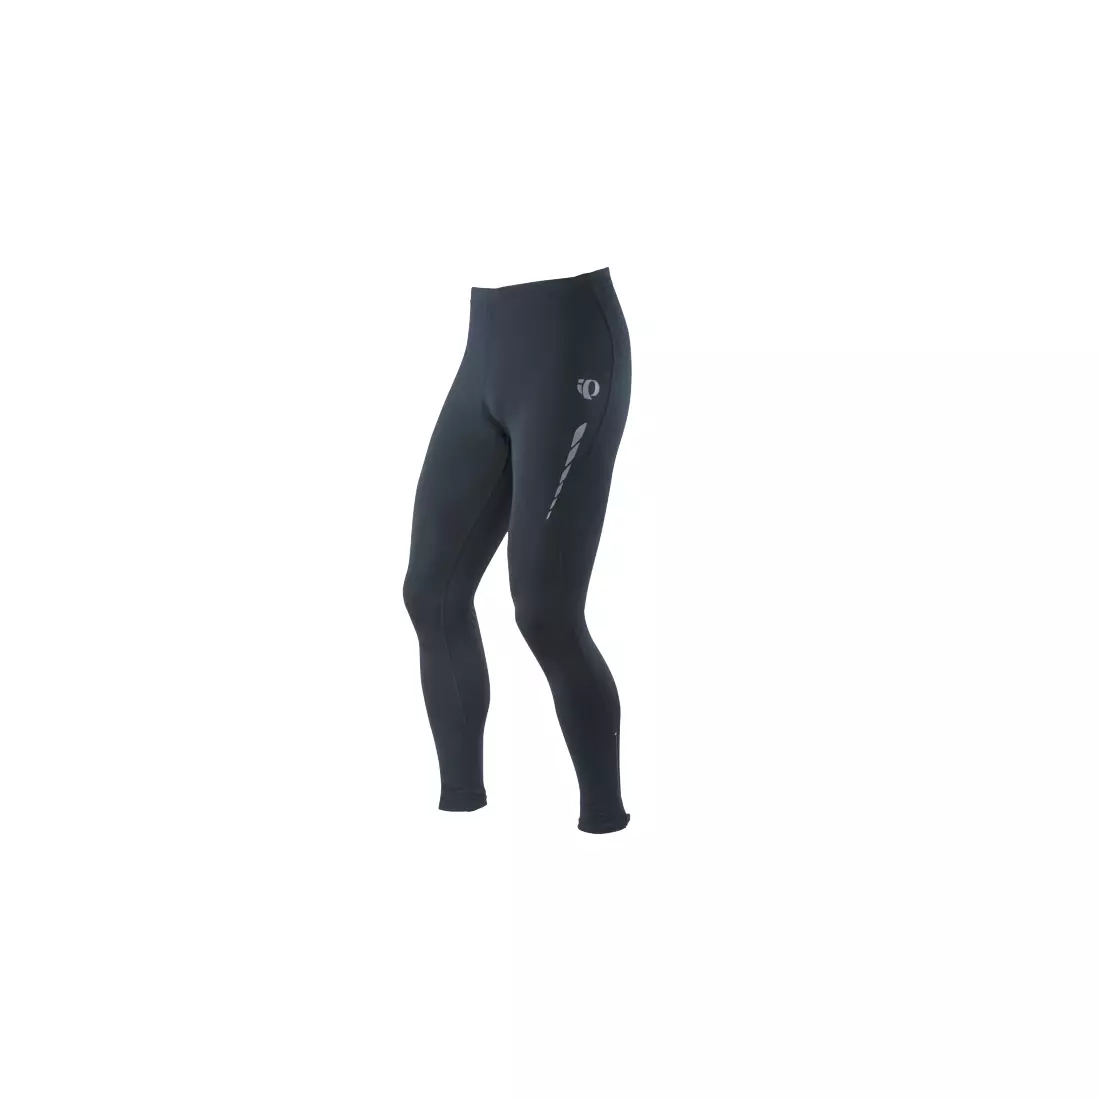 PEARL IZUMI - SELECT Tight 12111018-021 - men's trousers without suspenders, color: Black